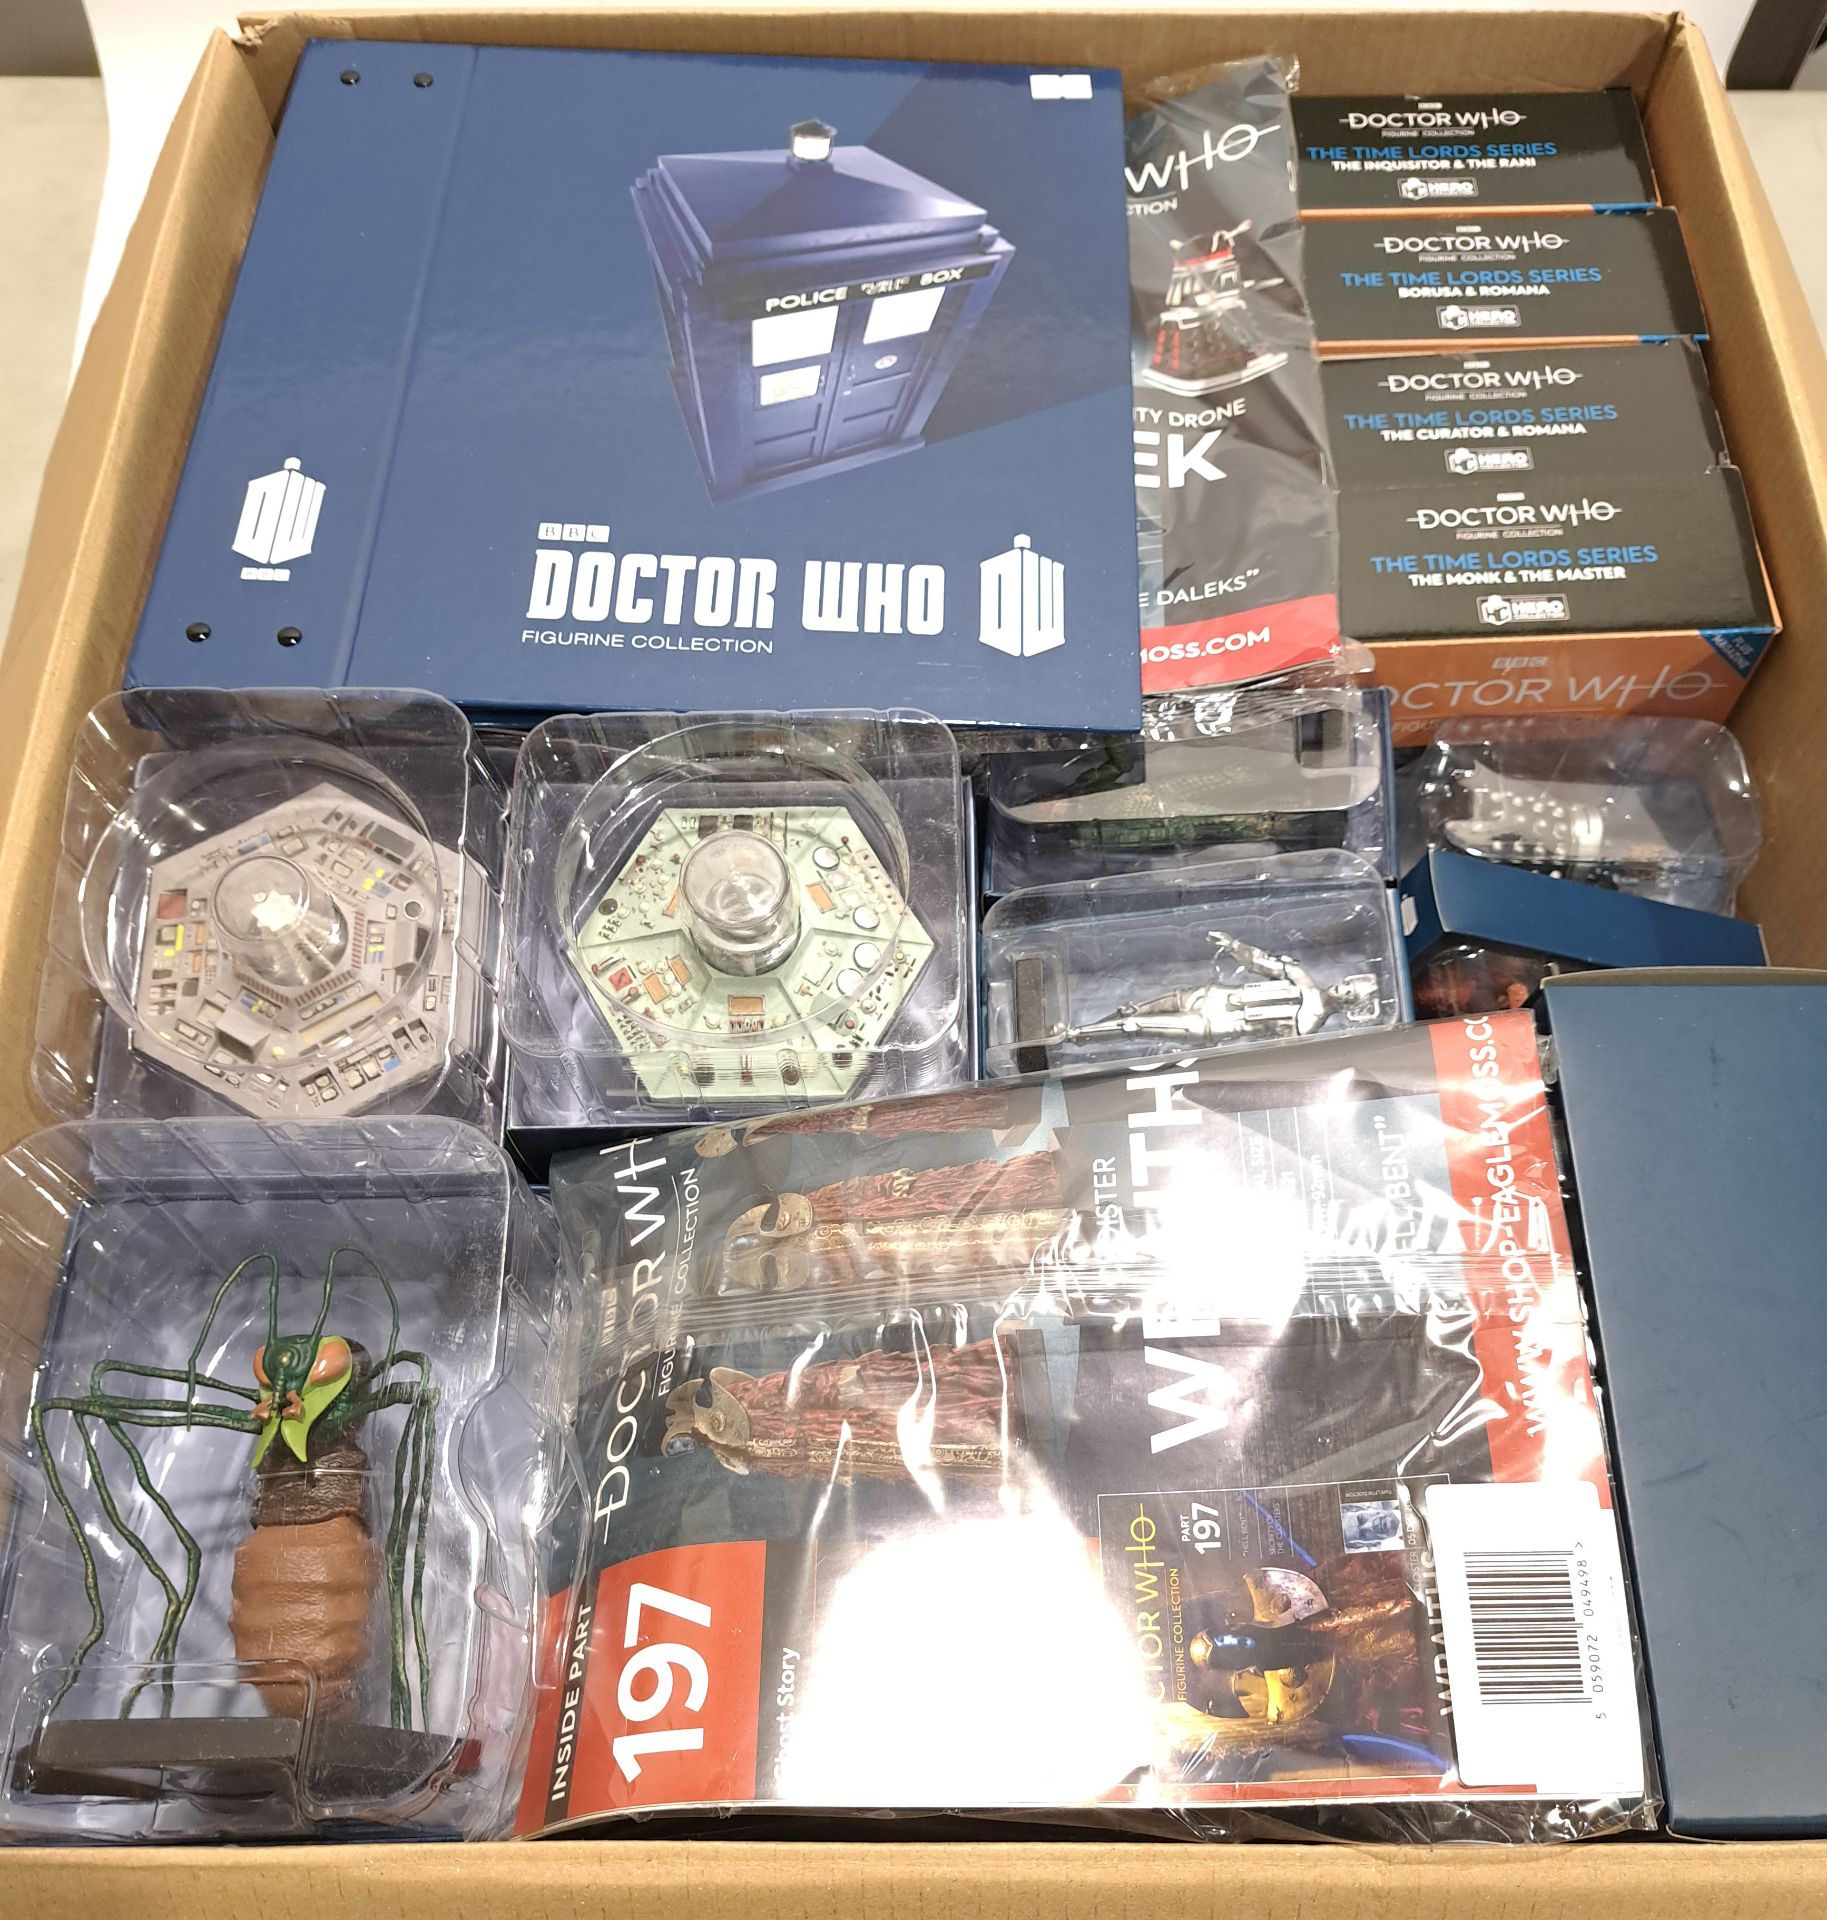 Quantity of BBC Doctor Who Figure Collection